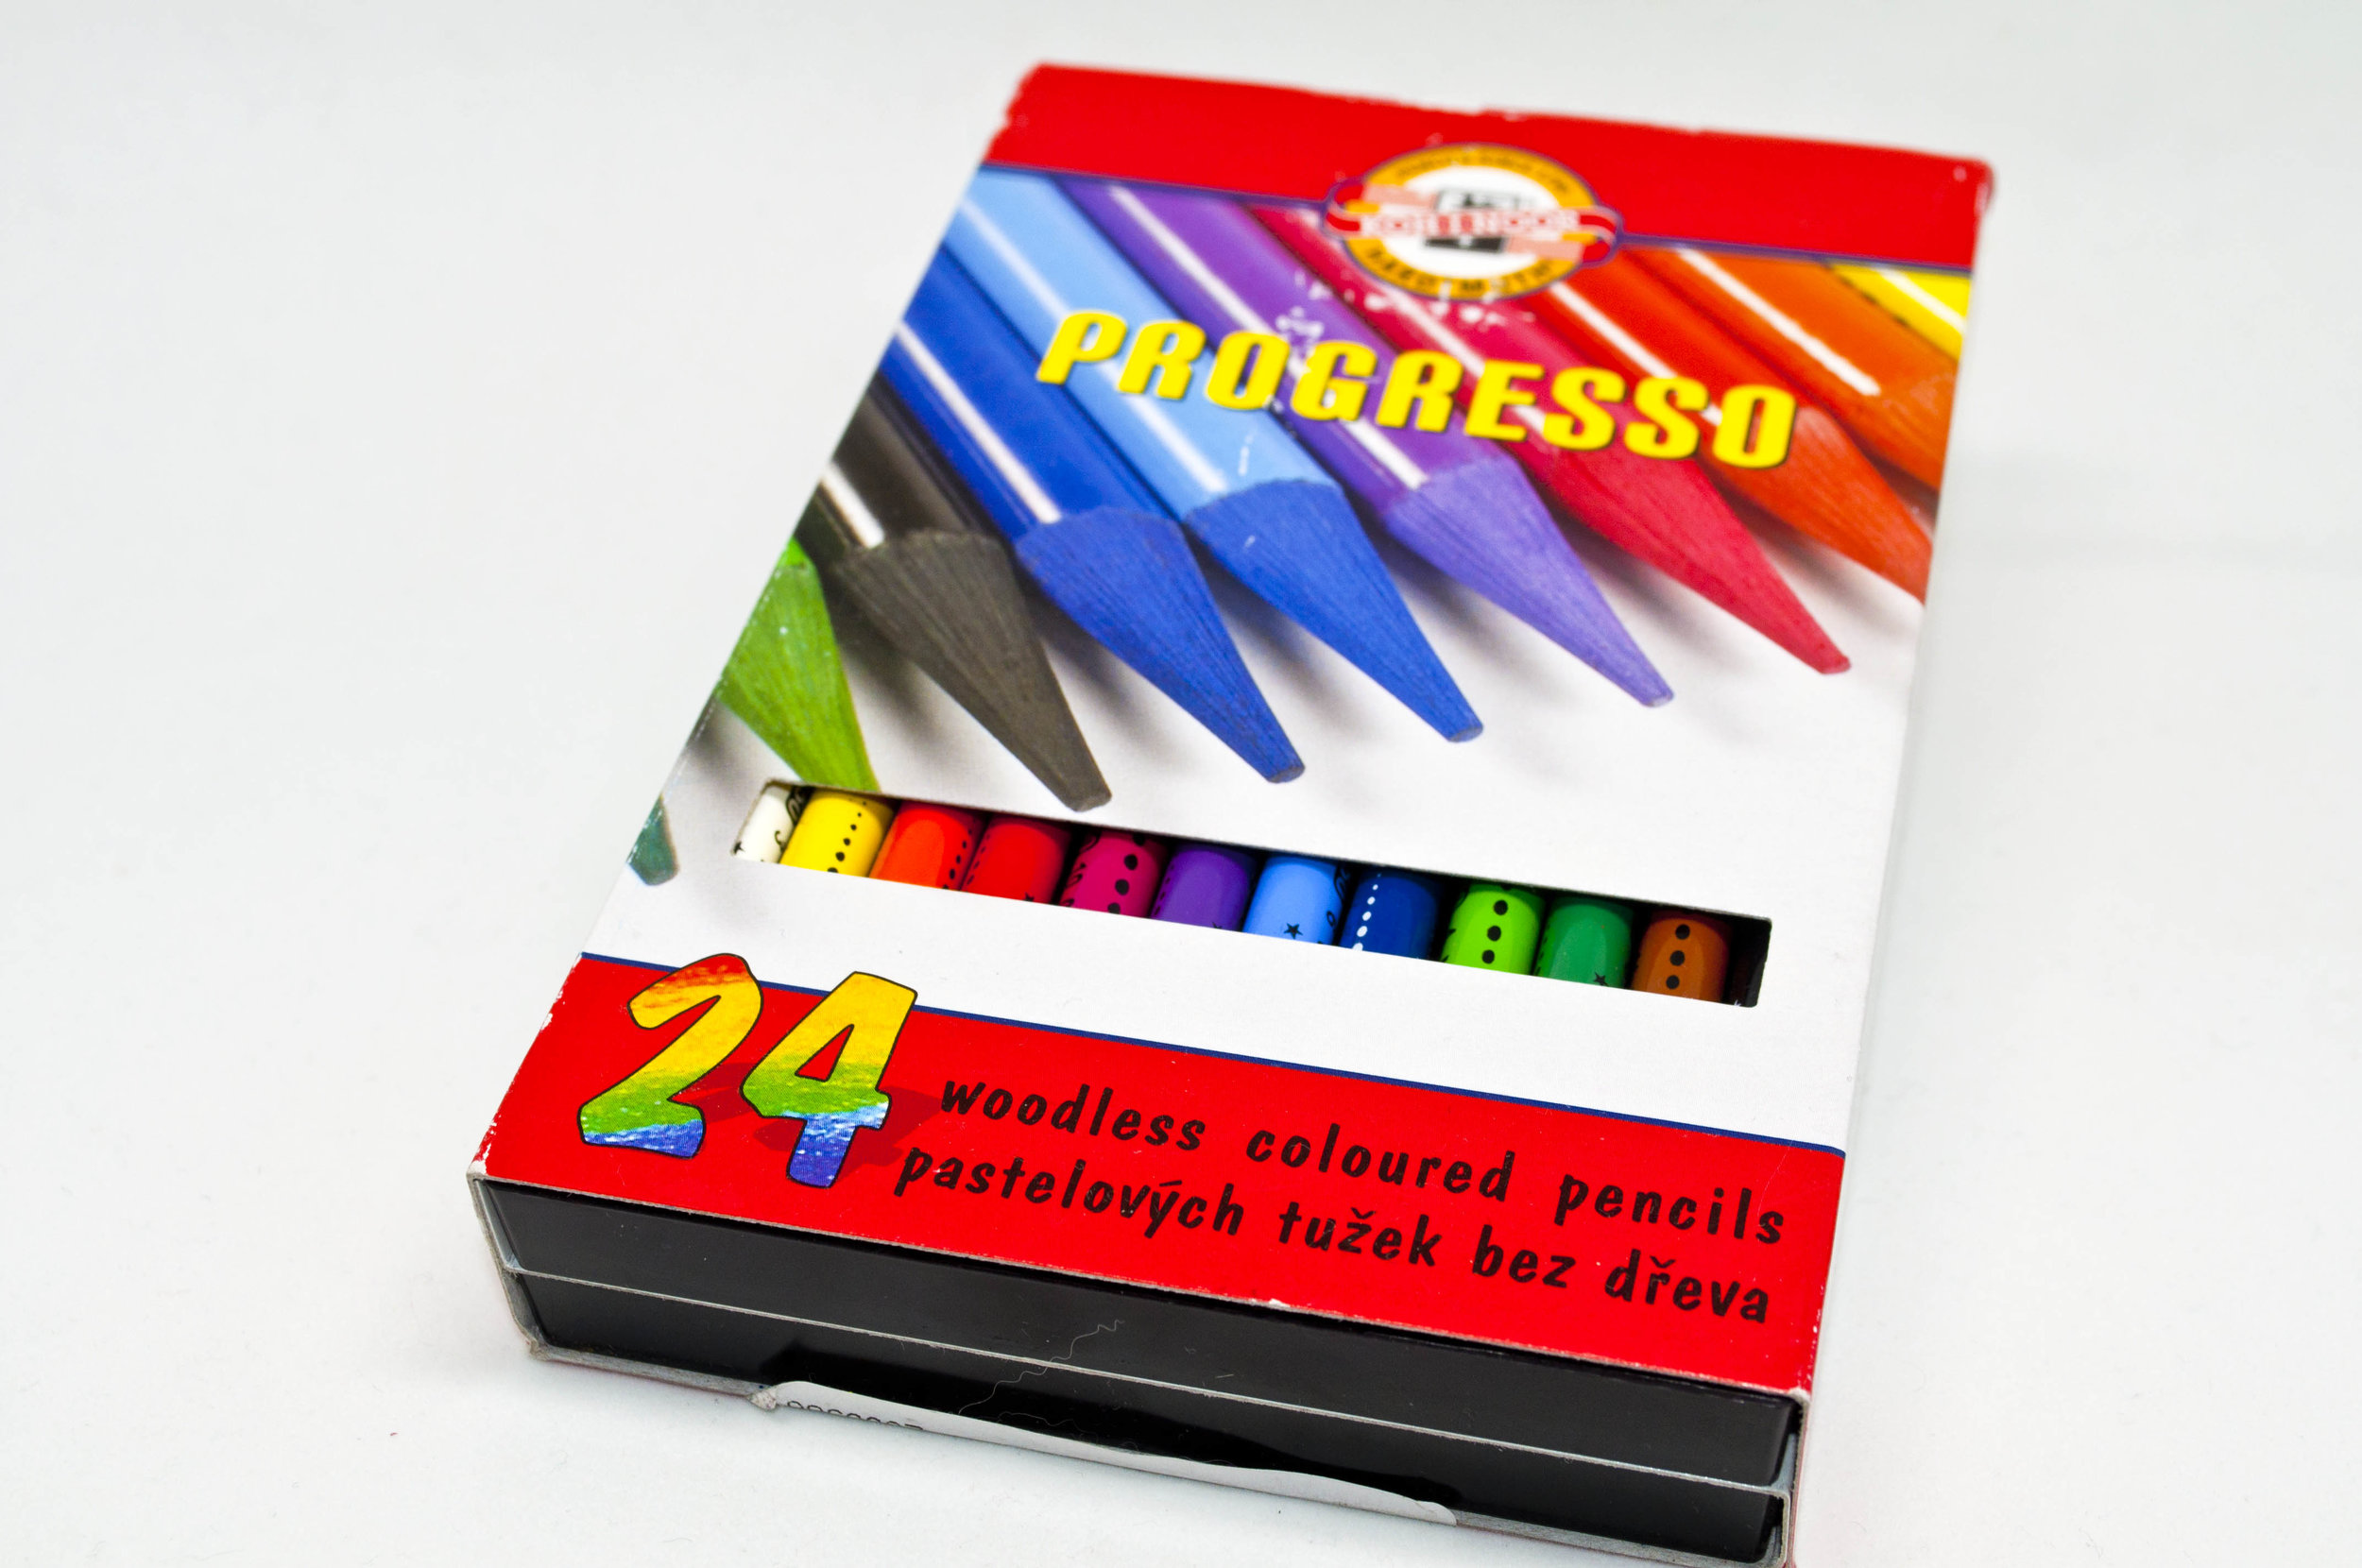 Lucky Art 24 Watercolor Pencils Professional, with A Brush and Tin Box - 24 Water Color Pencils for Children and Adult Coloring Books - Watercolor